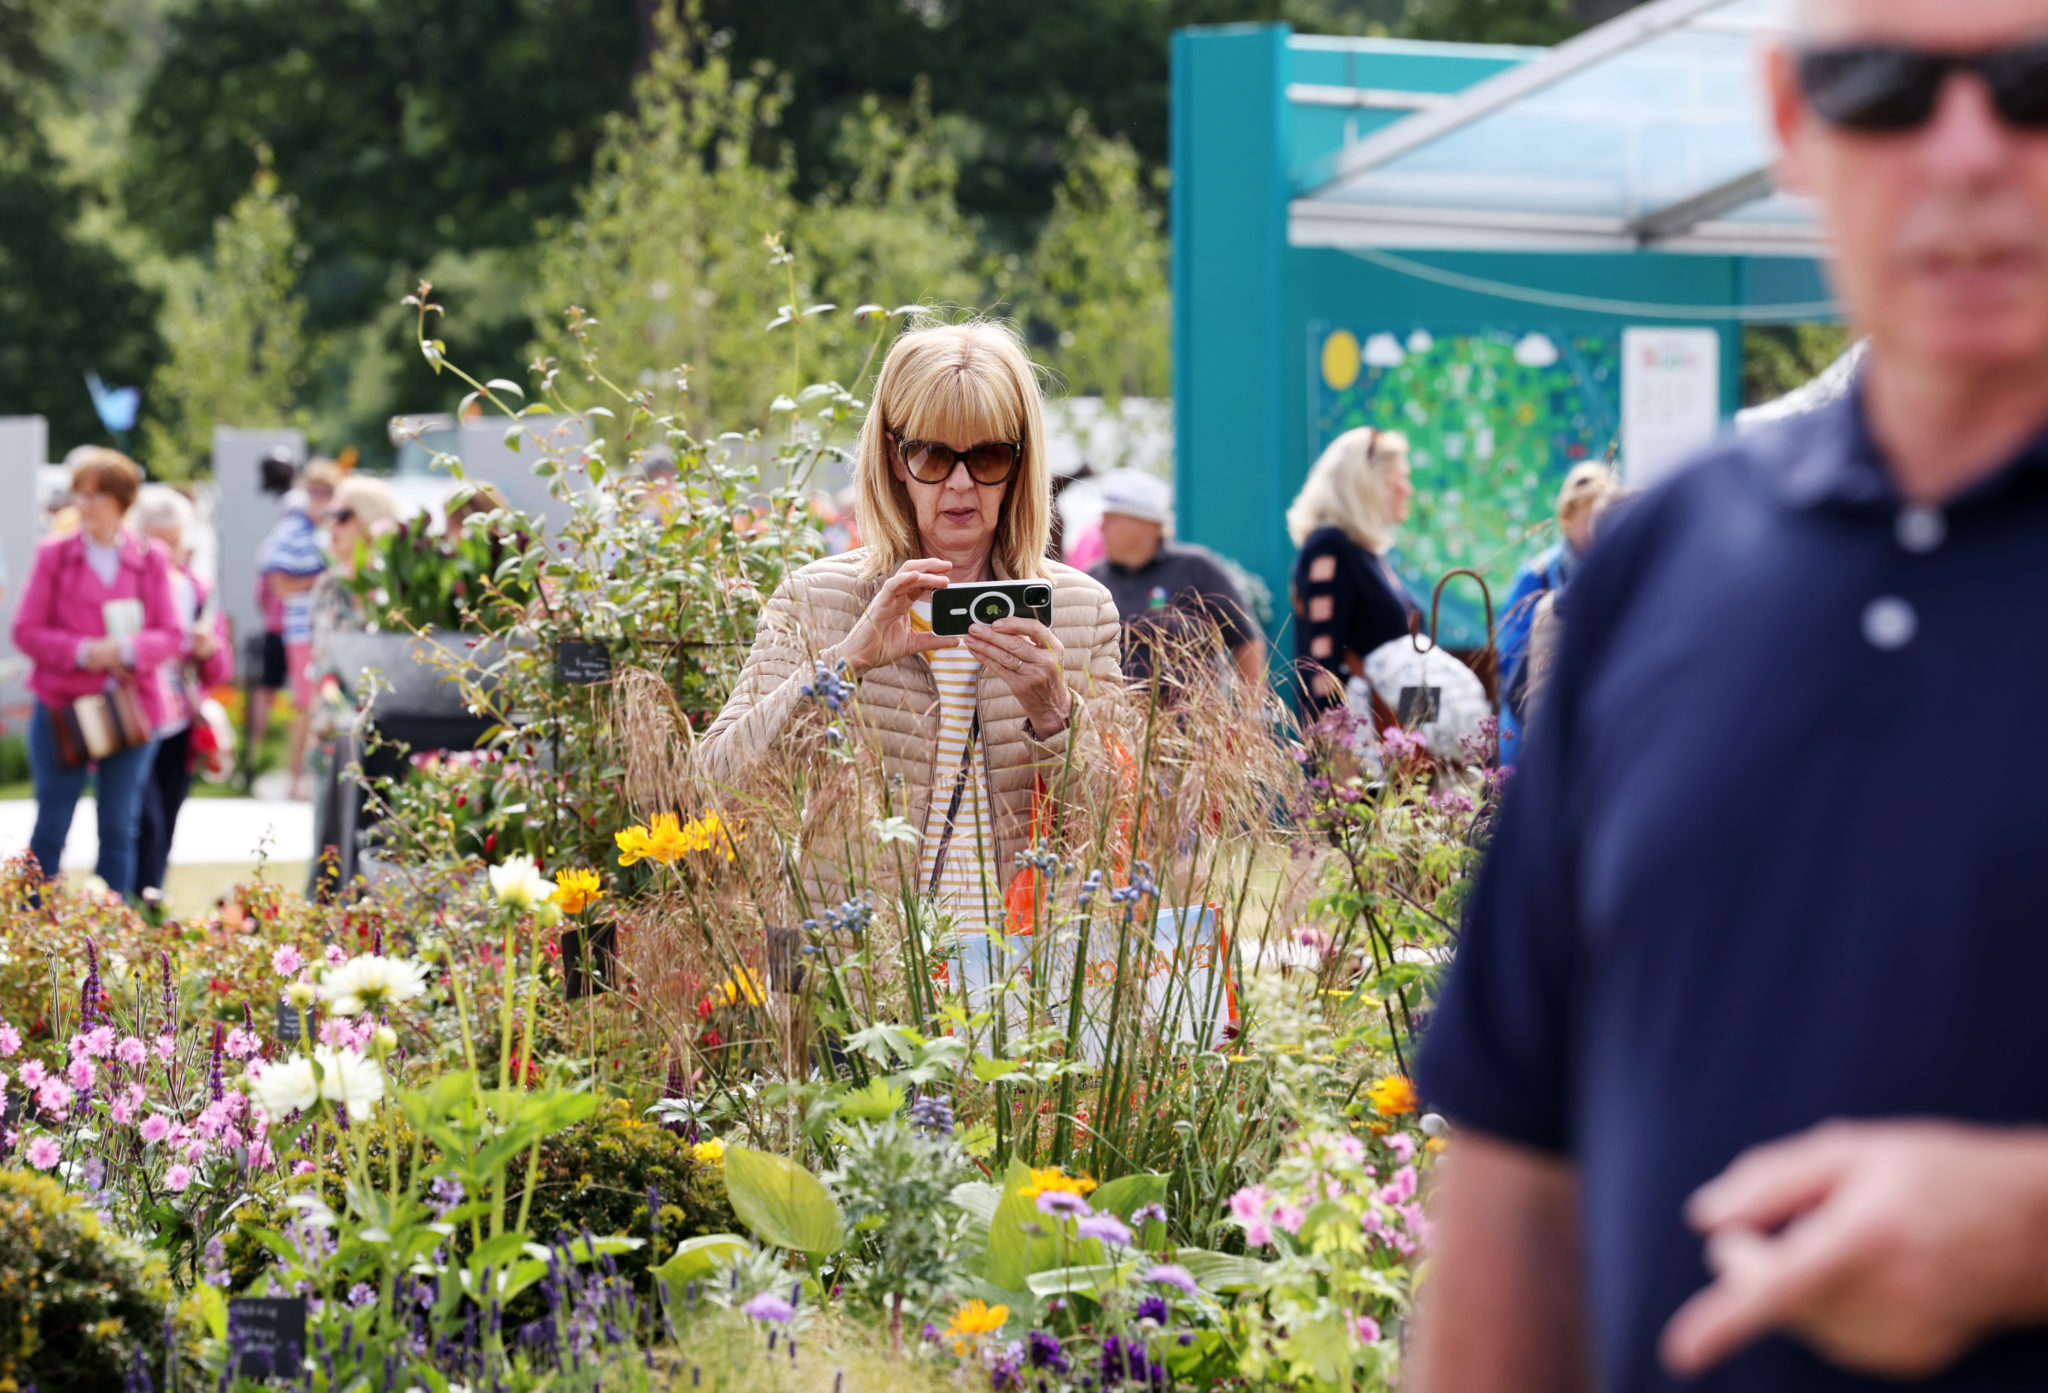 A woman at Bloom in the Phoenix Park, Dublin, 02-06-2022. Image: Sam Boal/RollingNews